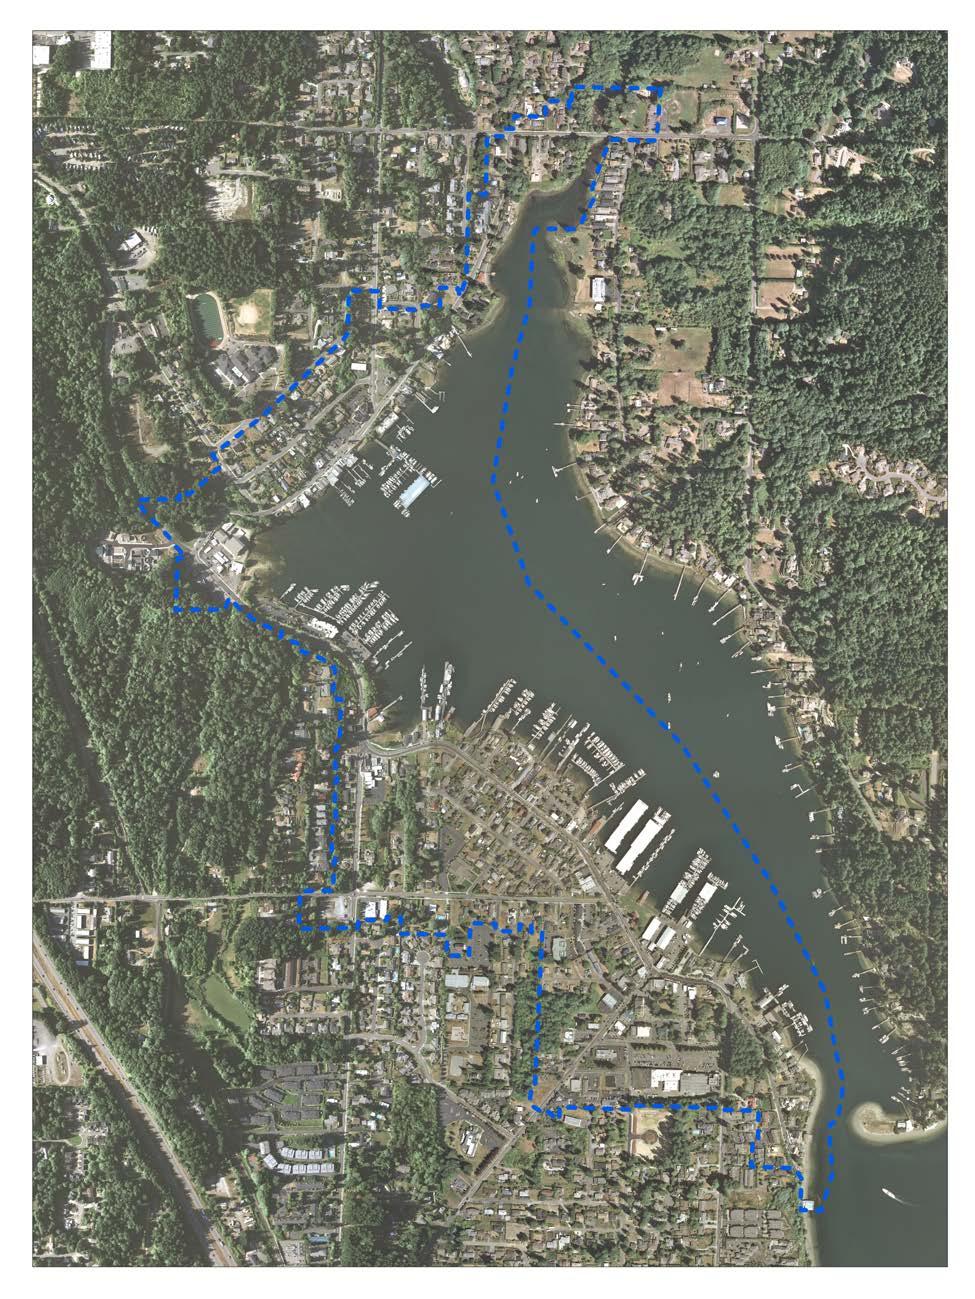 City of Gig Harbor Comprehensive Plan THE HARBOR The Harbor area as